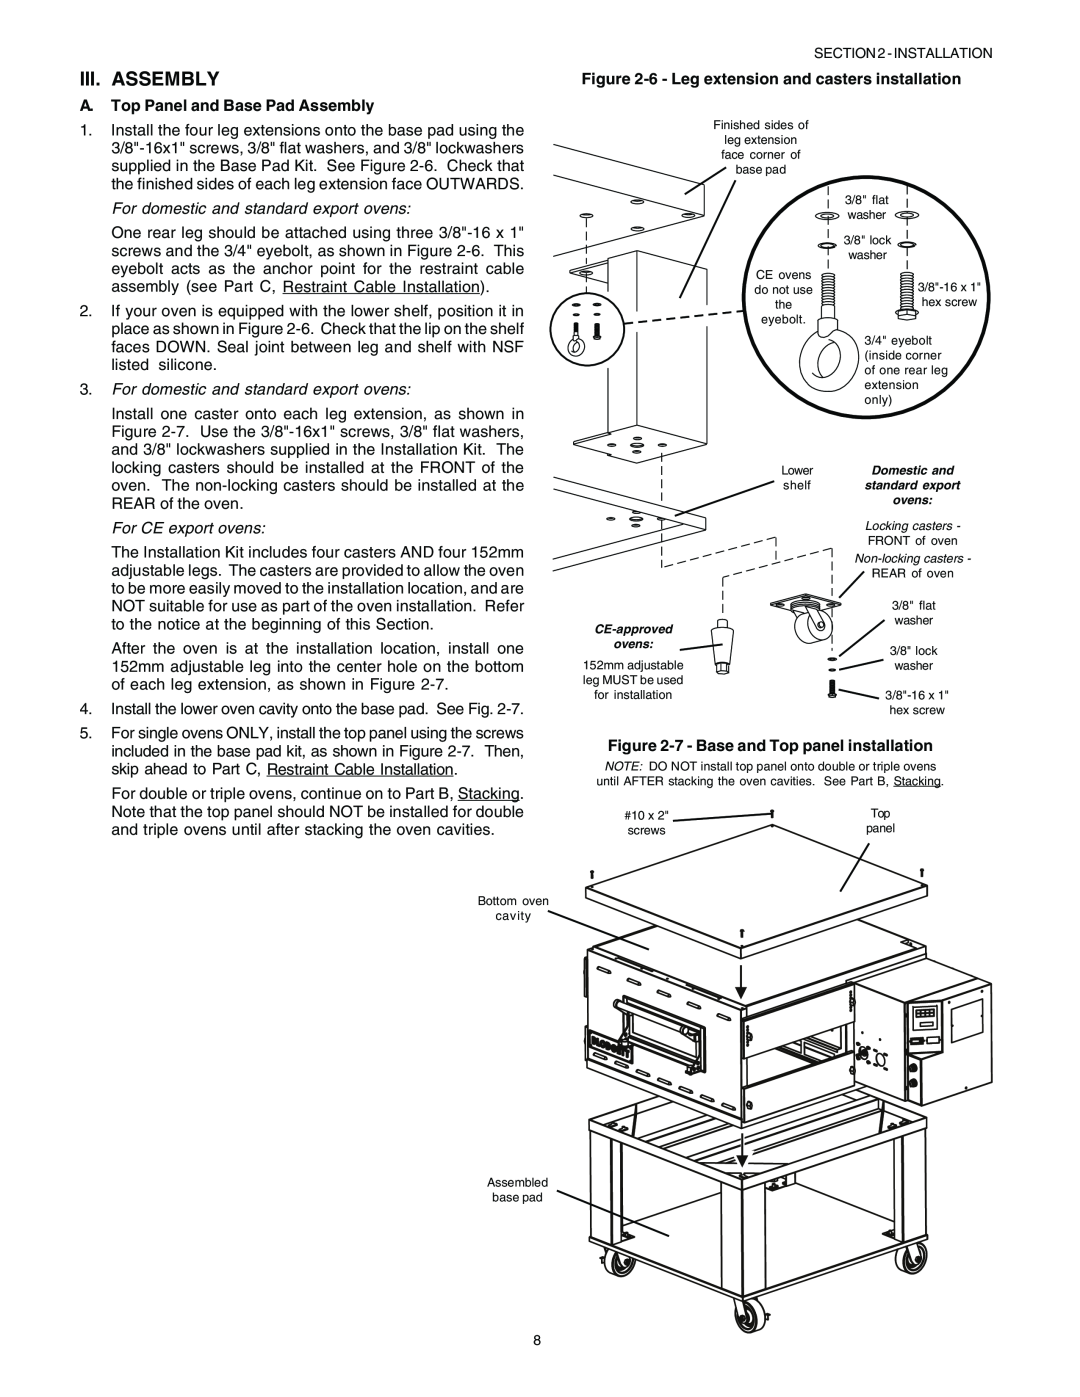 Blodgett BG2136 manual English, A. Top Panel and Base Pad Assembly, 6 - Leg extension and casters installation 